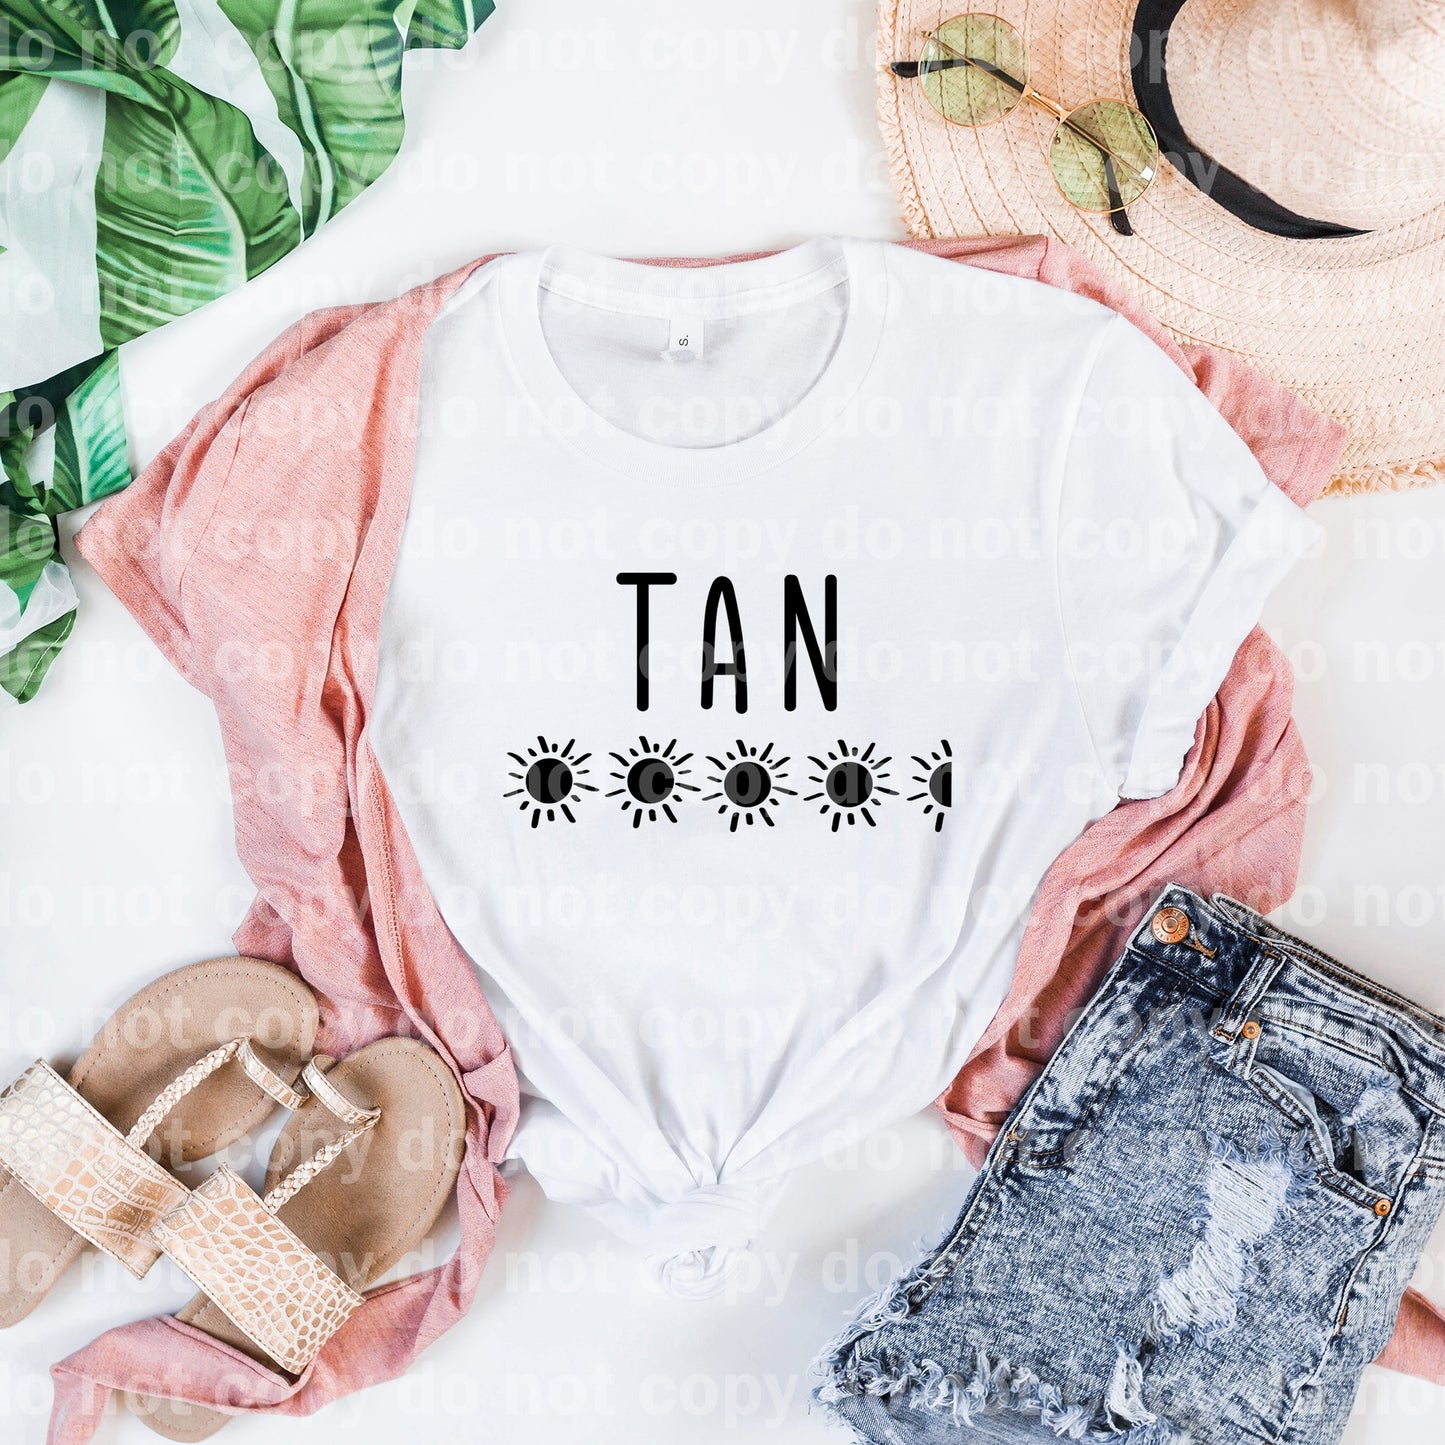 Tan Sun Loading Full Color/One Color Dream Print or Sublimation Print